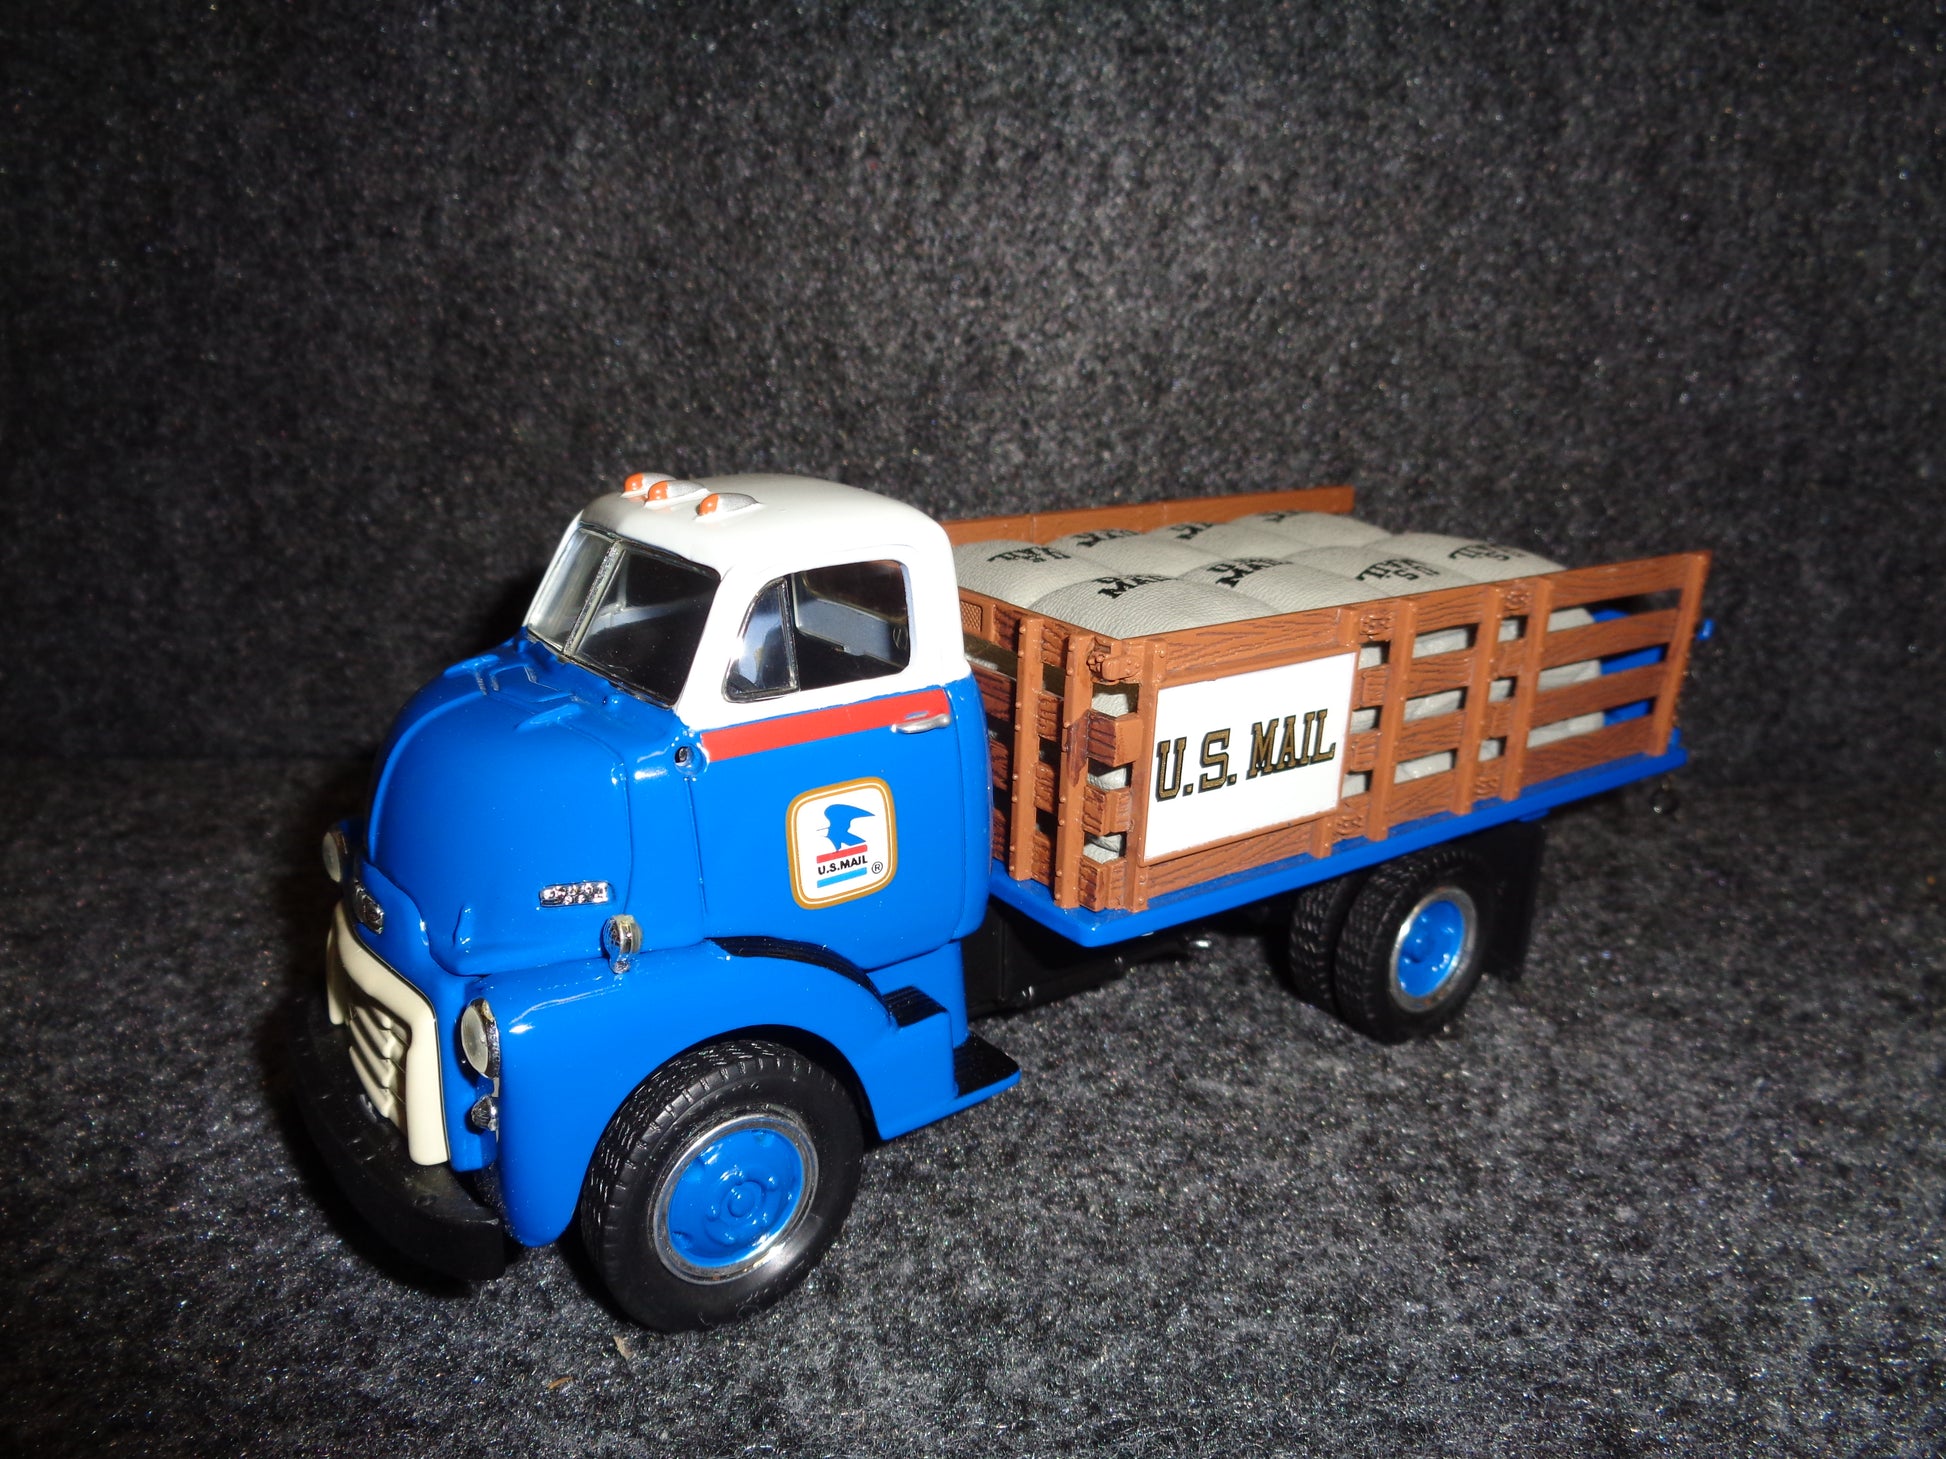 U.S. Mail 1952 GMC Stake Bed Truck